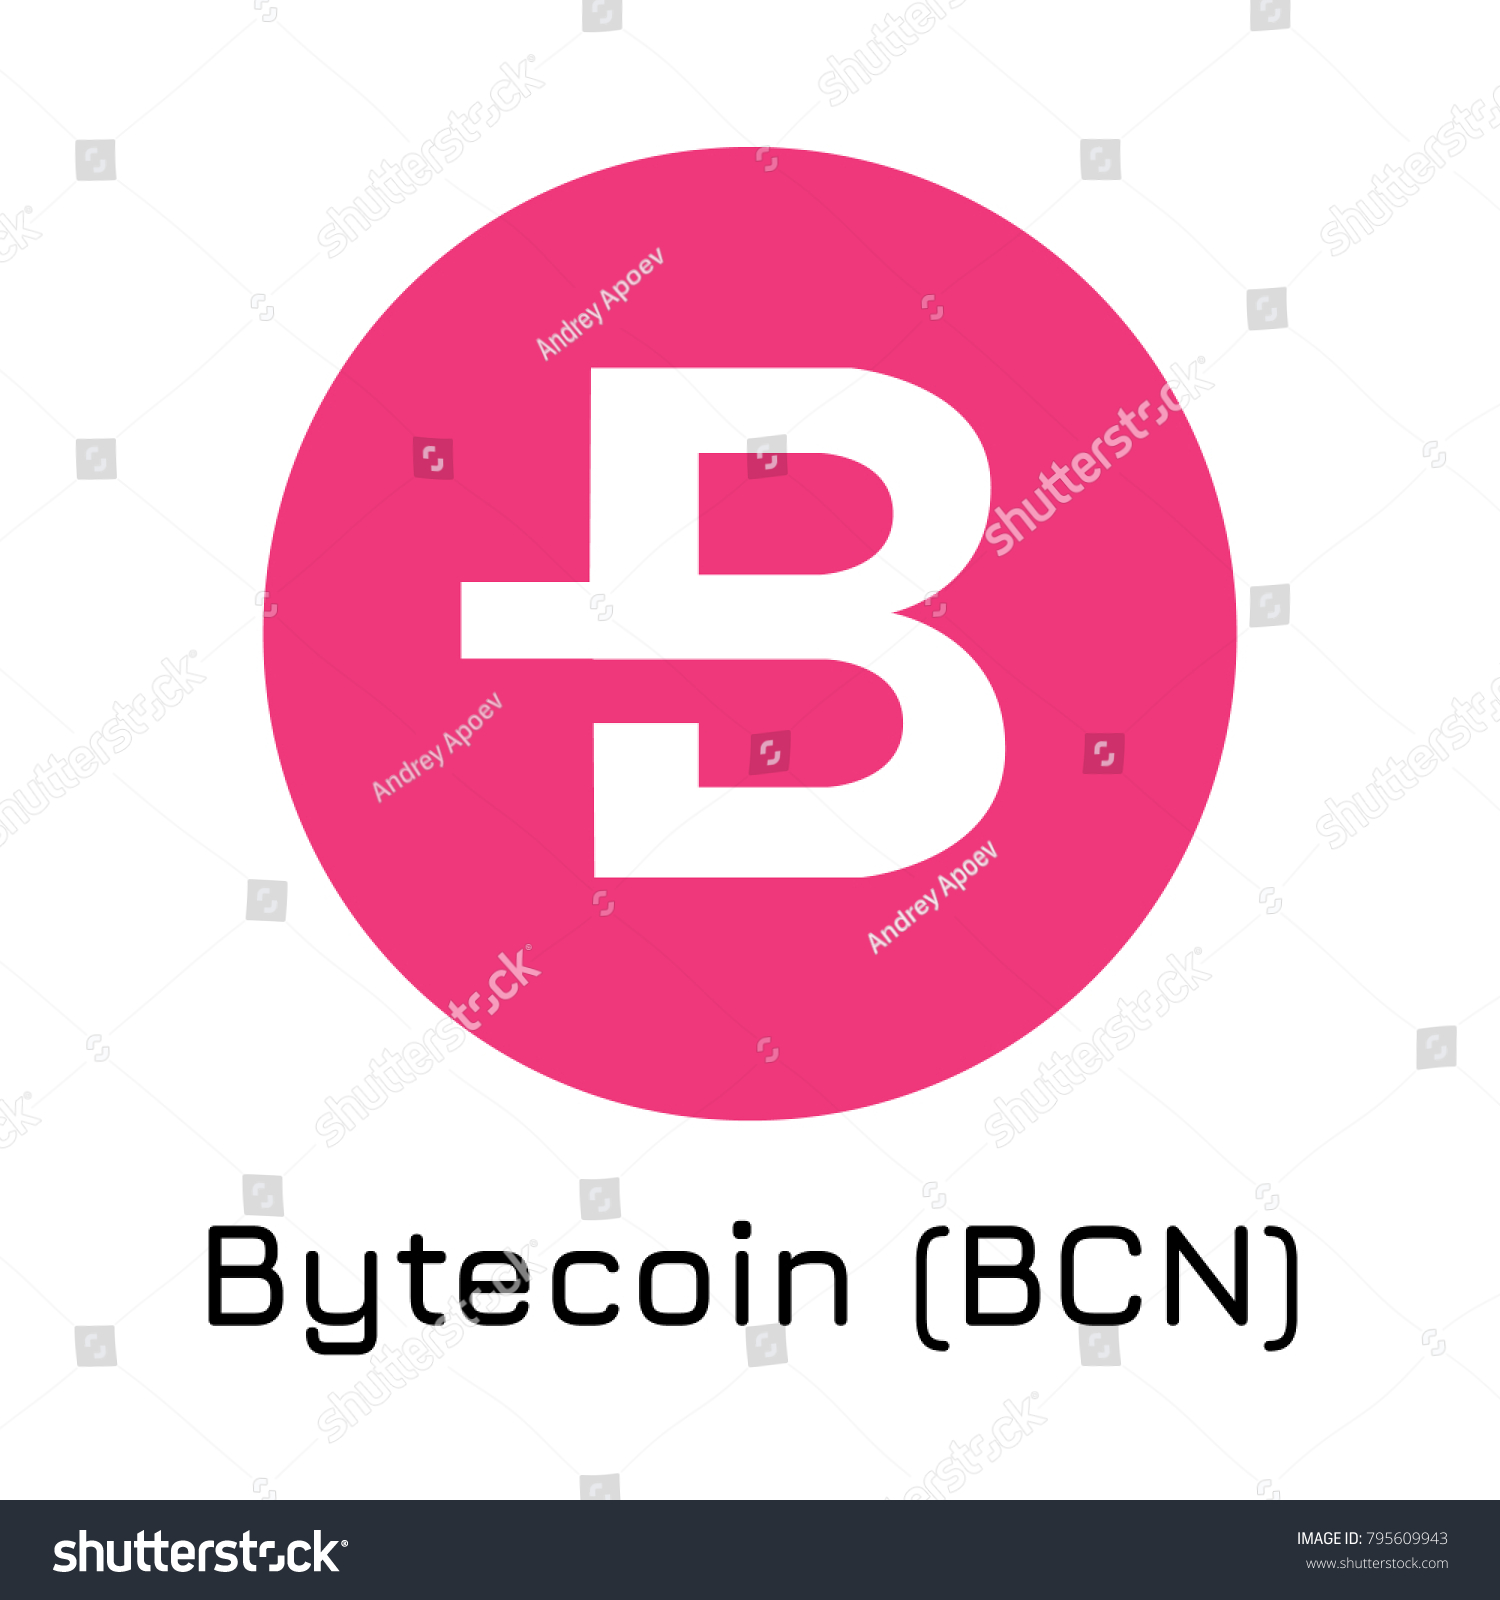 SVG of Vector illustration crypto coin icon on isolated white background Bytecoin (BCN). Name of the crypto currency and the short trade name on the exchange. Digital currency svg